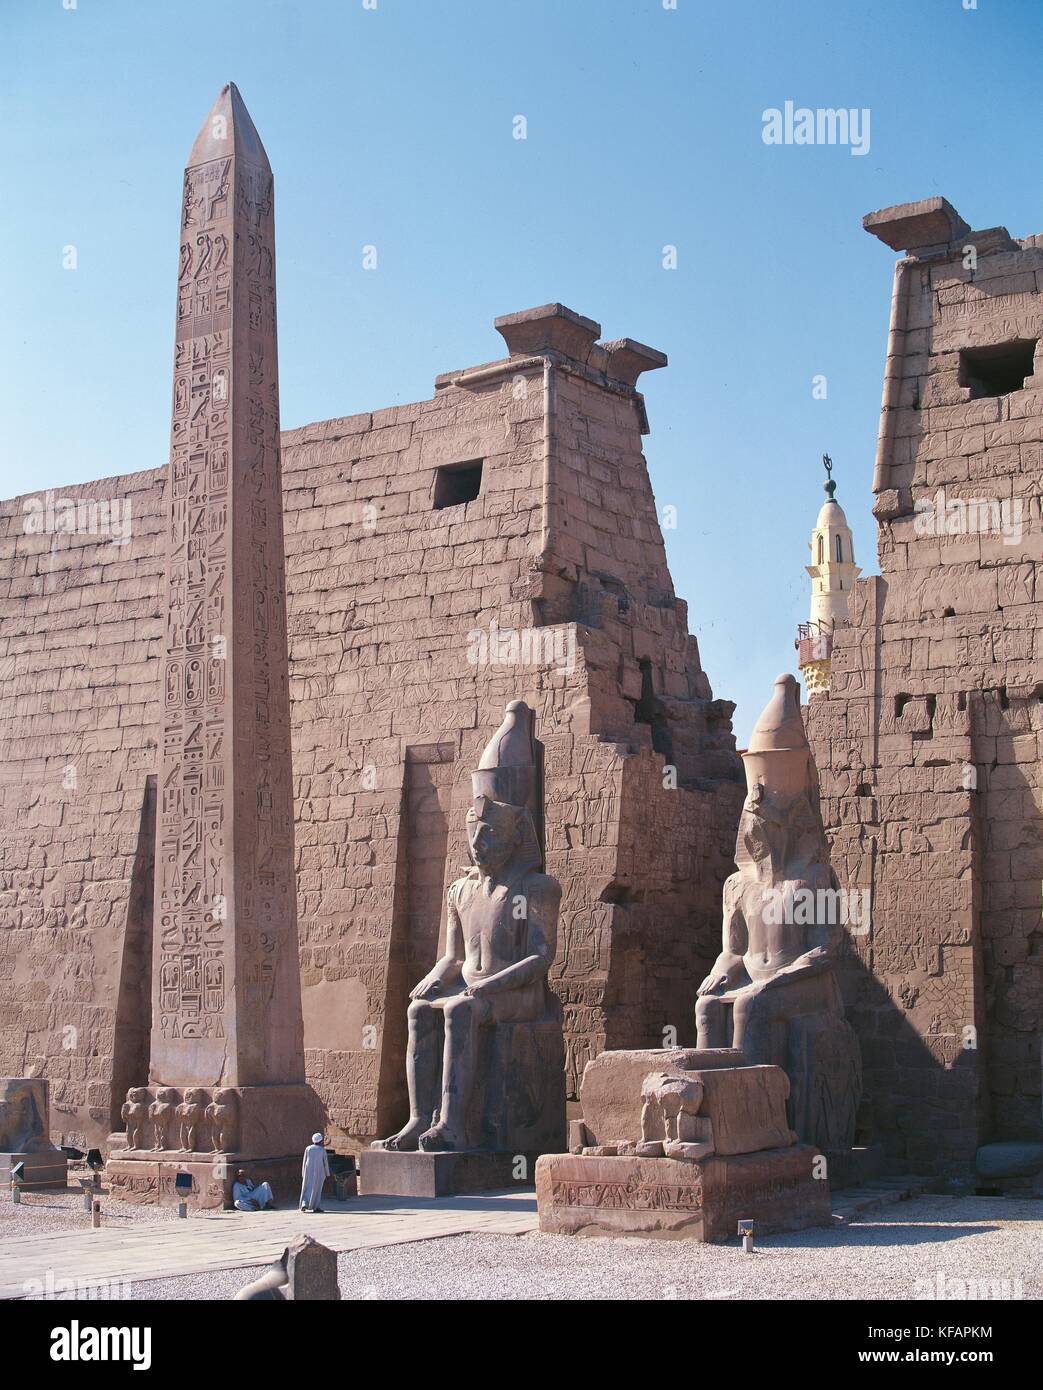 Egypt, Ancient Thebes (UNESCO World Heritage List, 1979), Luxor,  Karnak, The Temple of Amon. Pylon of Ramses II, 1290-1224 b.C., with obelisk and two colossal statues of pharaoh. Stock Photo